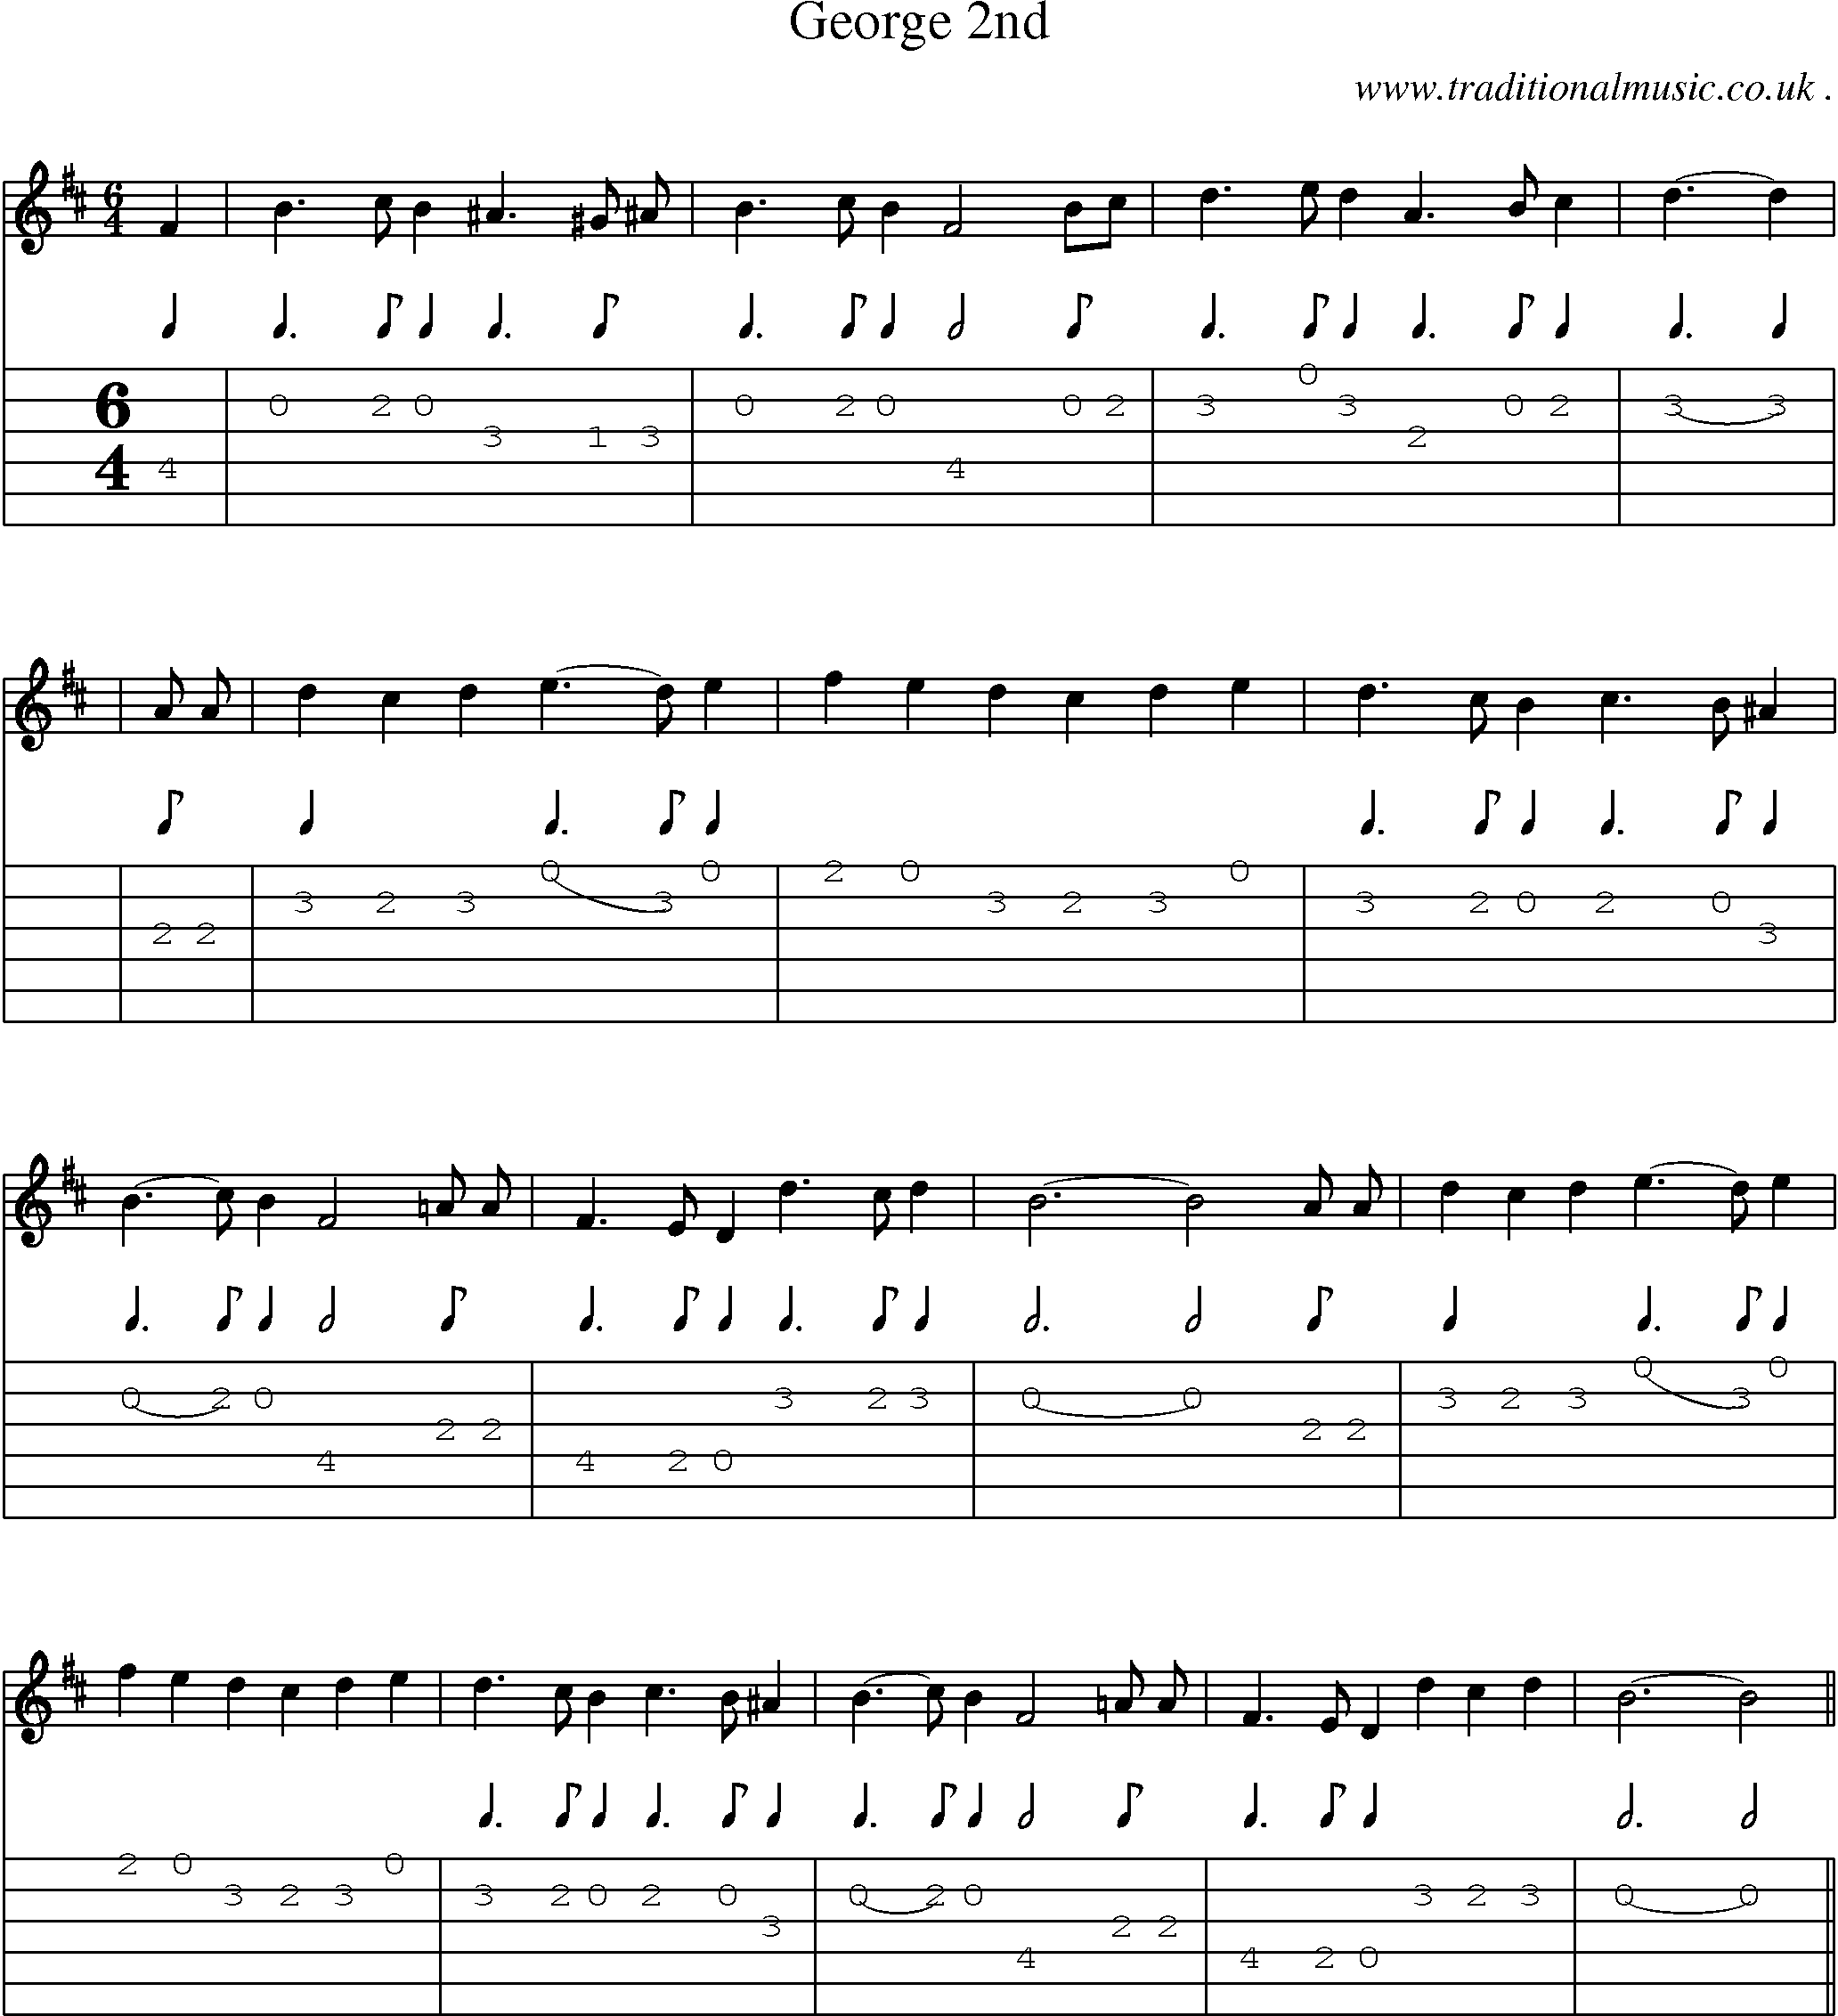 Sheet-Music and Guitar Tabs for George 2nd